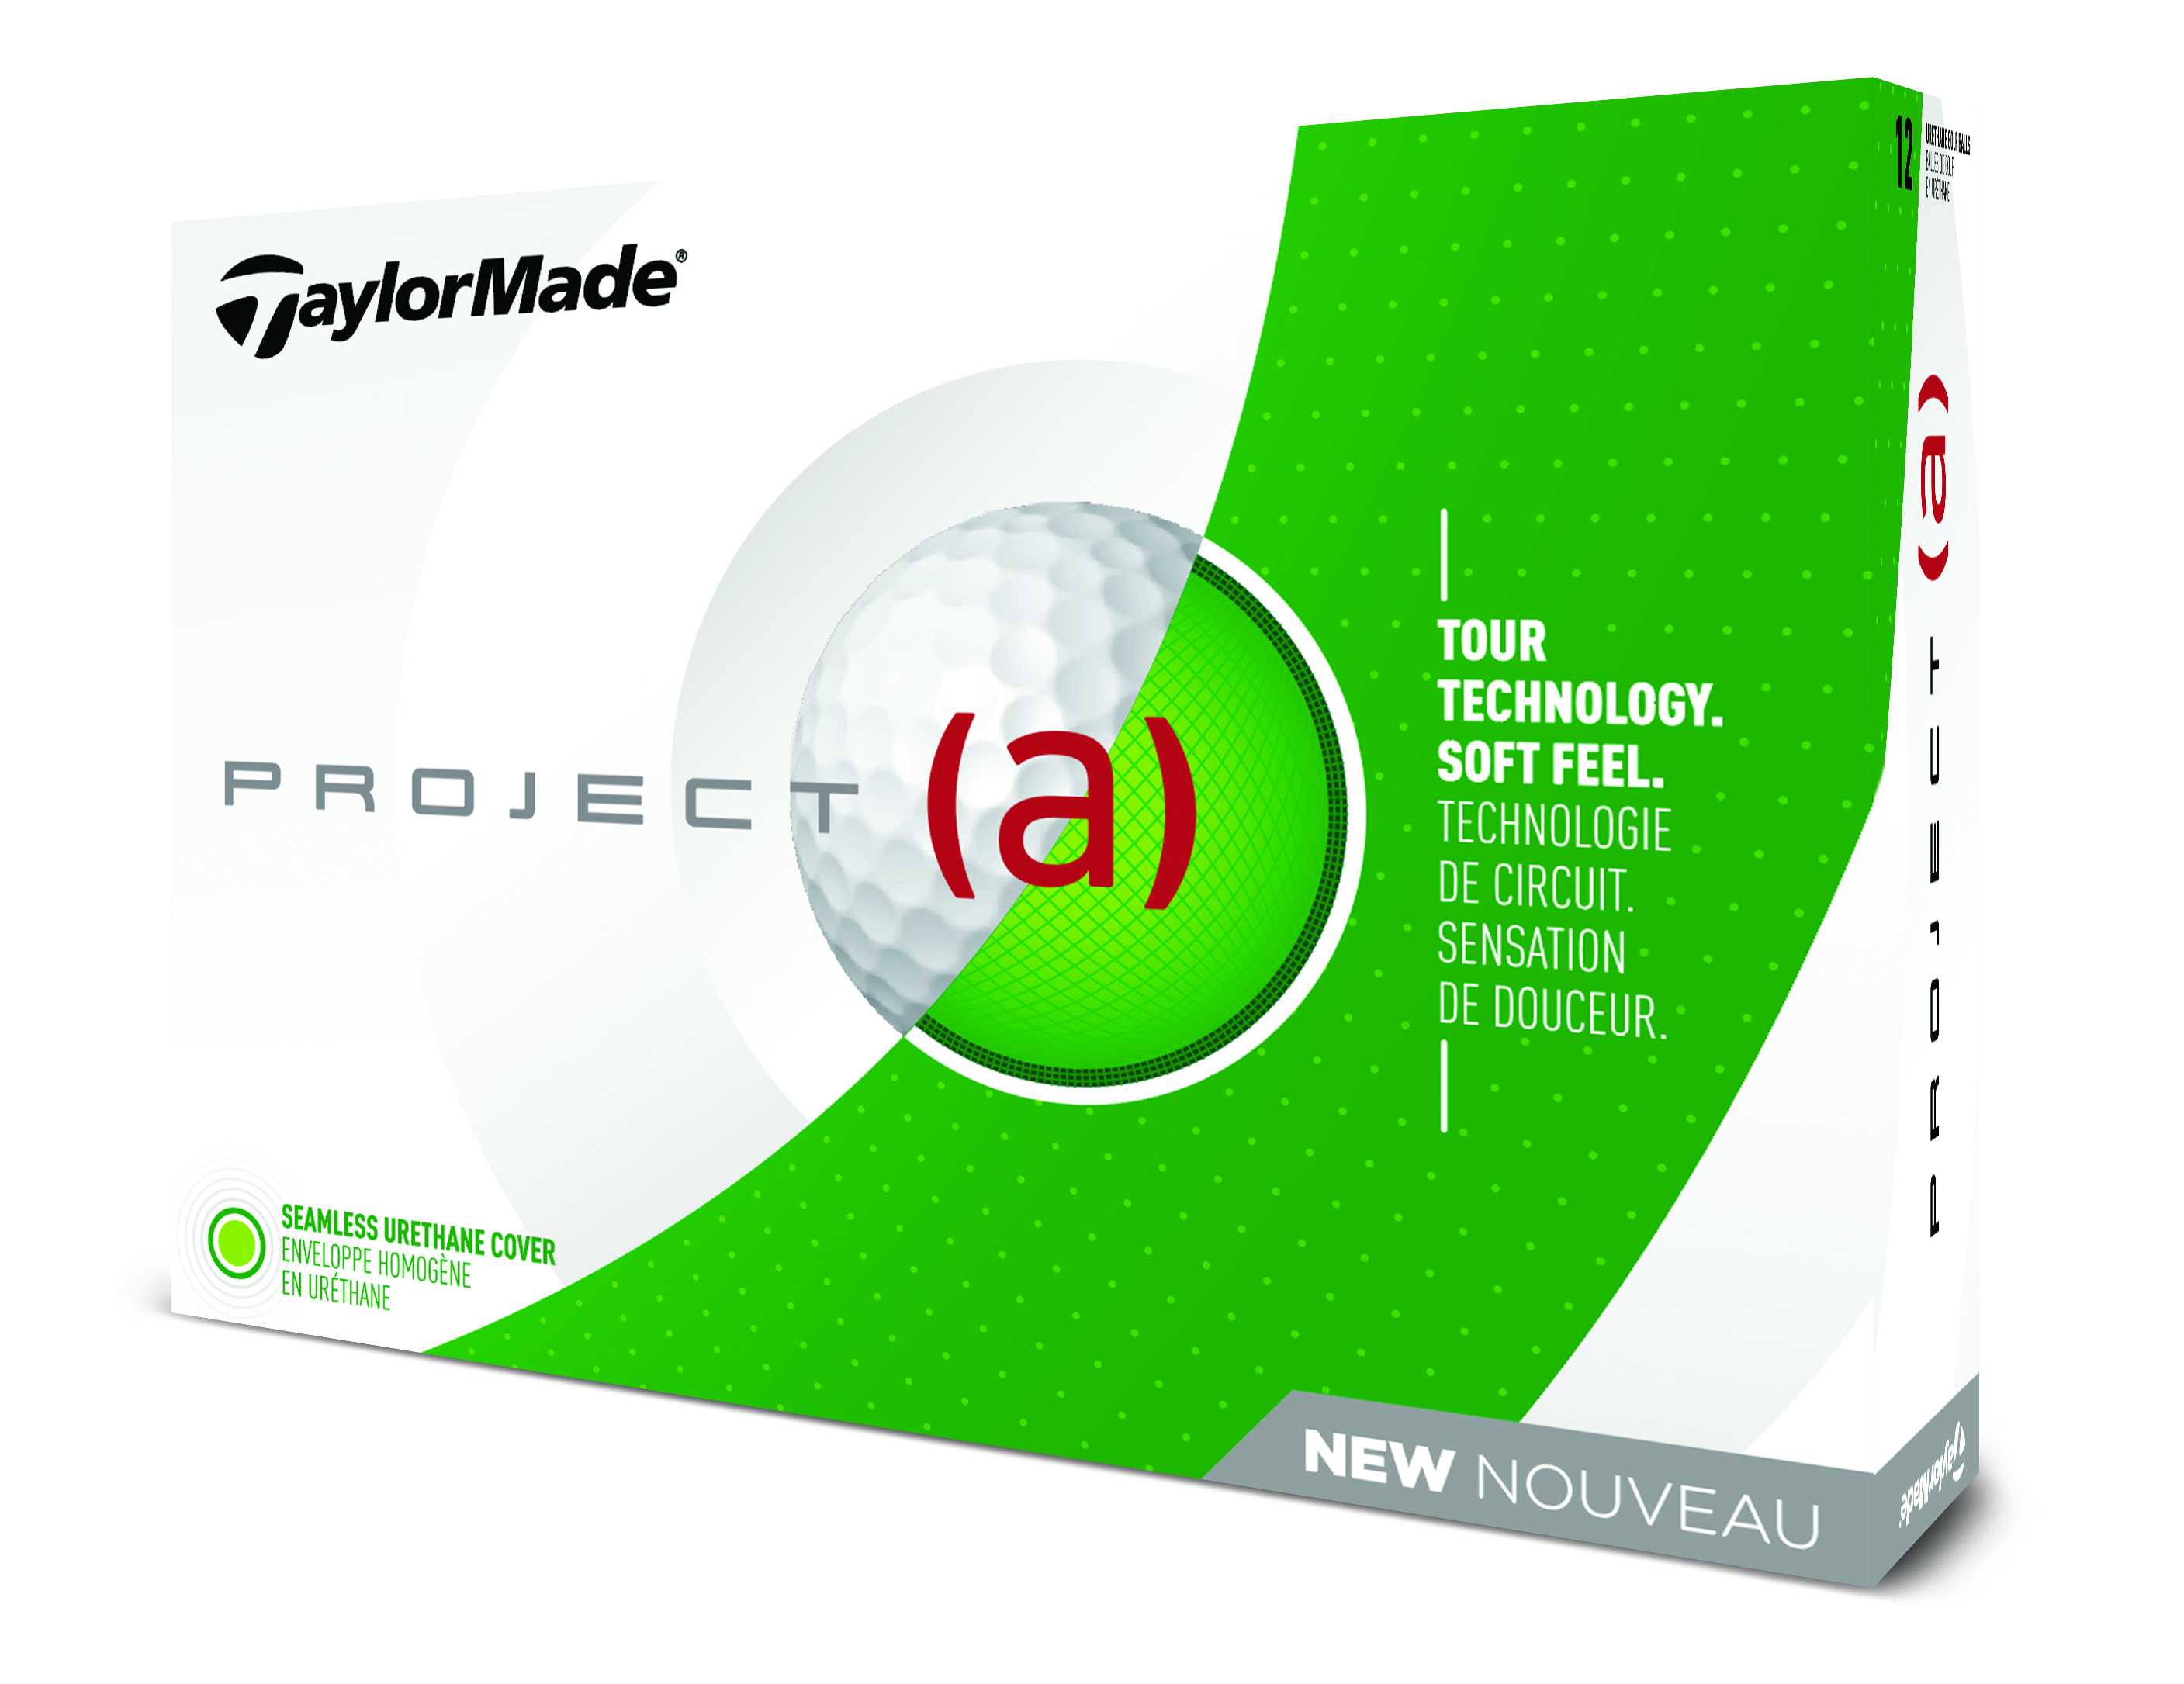 Dustin Johnson v Jason Day: TaylorMade Project (a) Spin Challenge